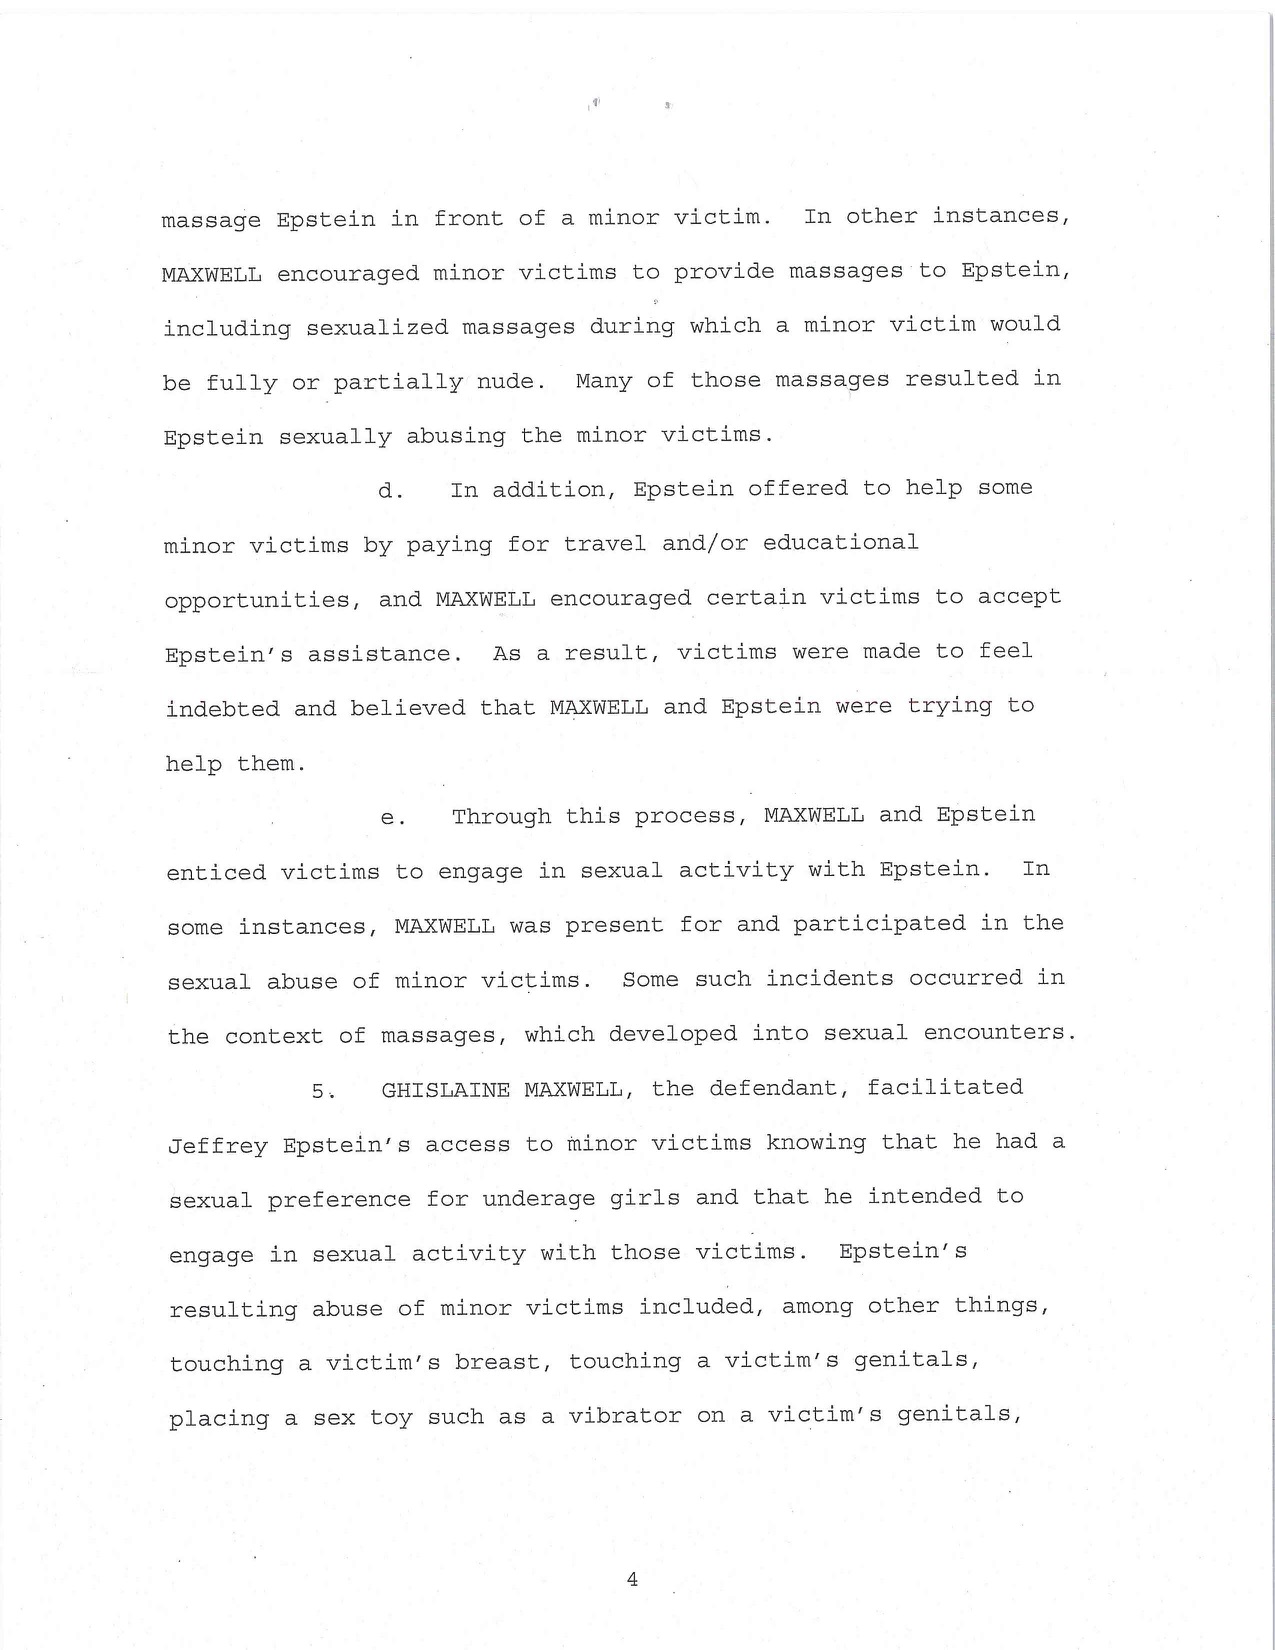 The United States vs Ghislaine Maxwell -  page four of the indictment of Ghislaine Maxwell for sex crimes against minors